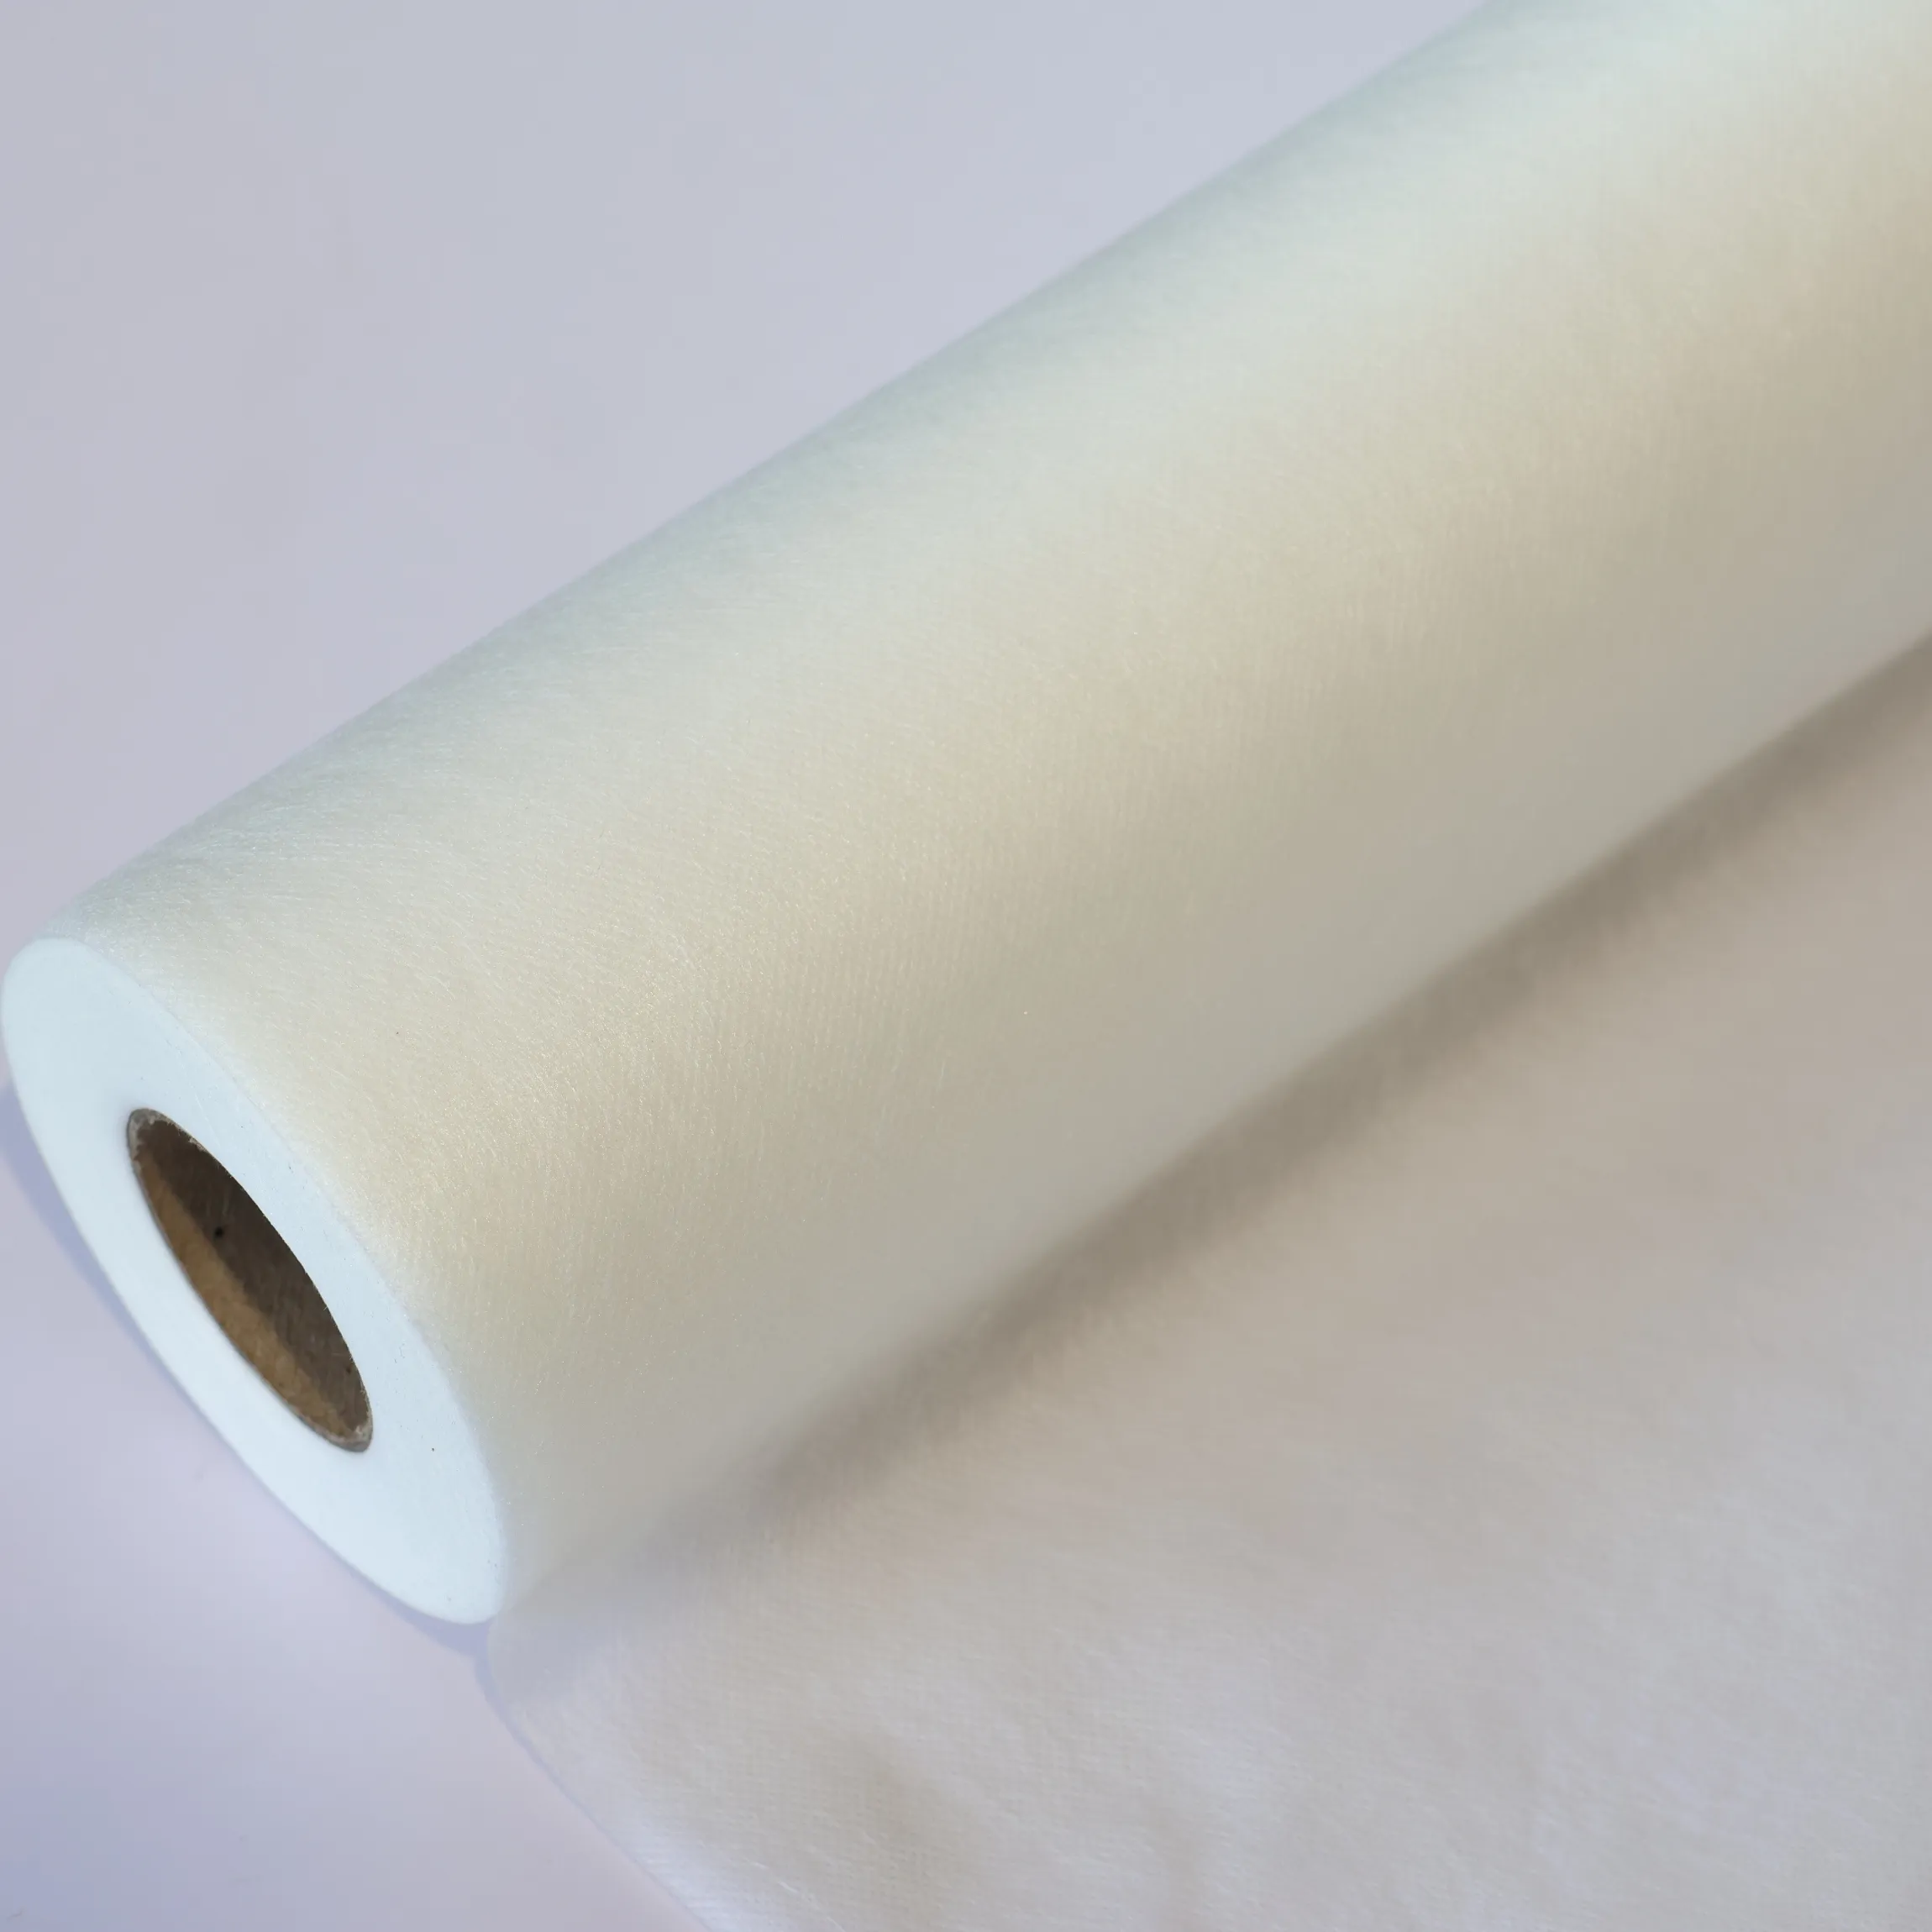 Stocks 100% PVA Embroidery Backing Cold Water Soluble Fabric Paper Non Woven Fabric for embroidery stabilizer